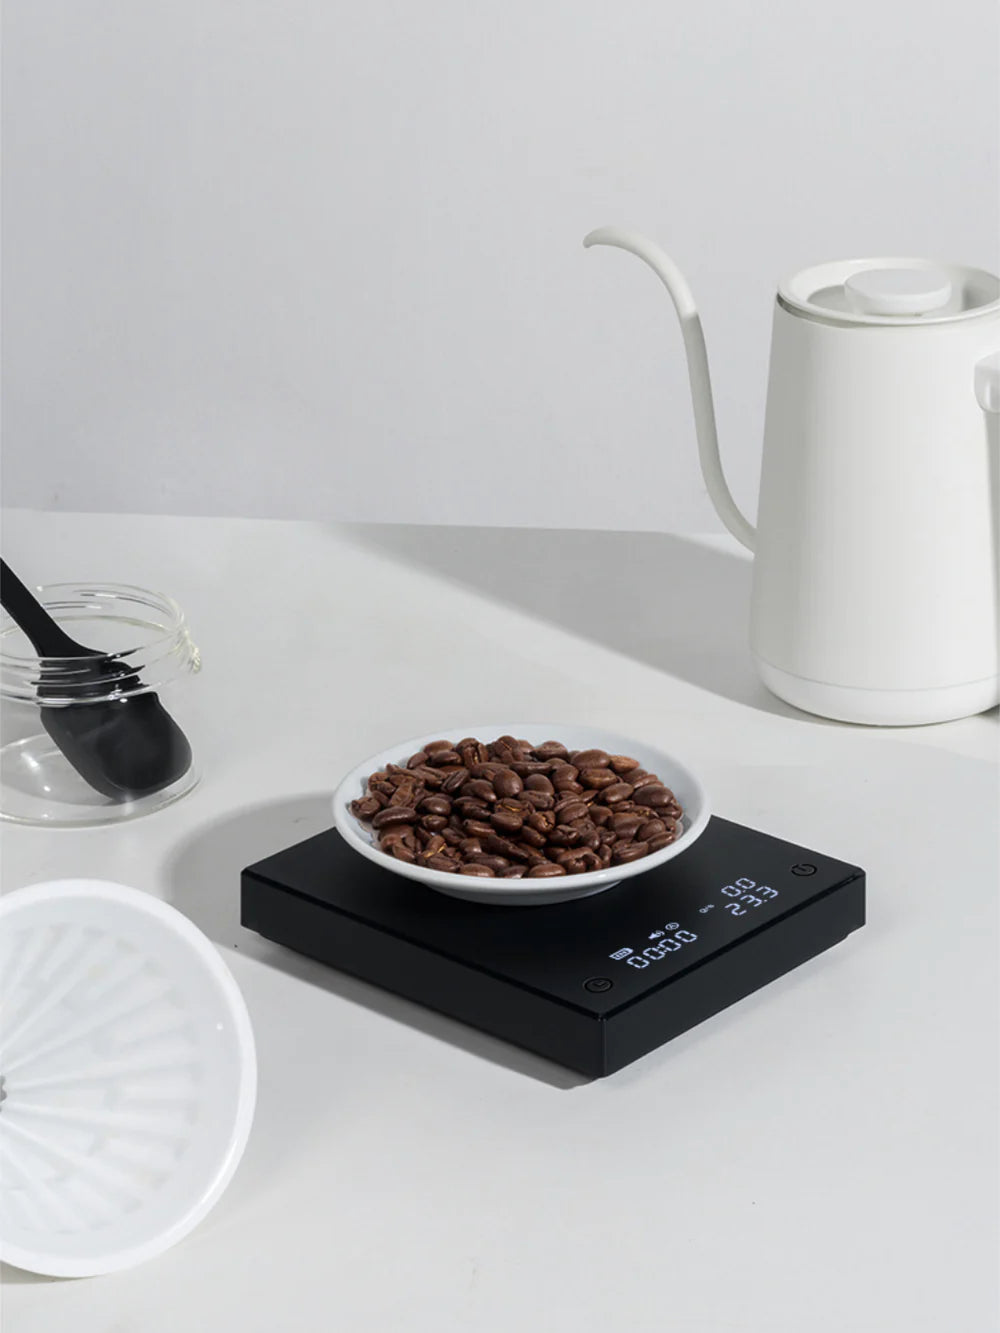 Timemore Black Mirror BASIC 2 Coffee Scale - Image 12